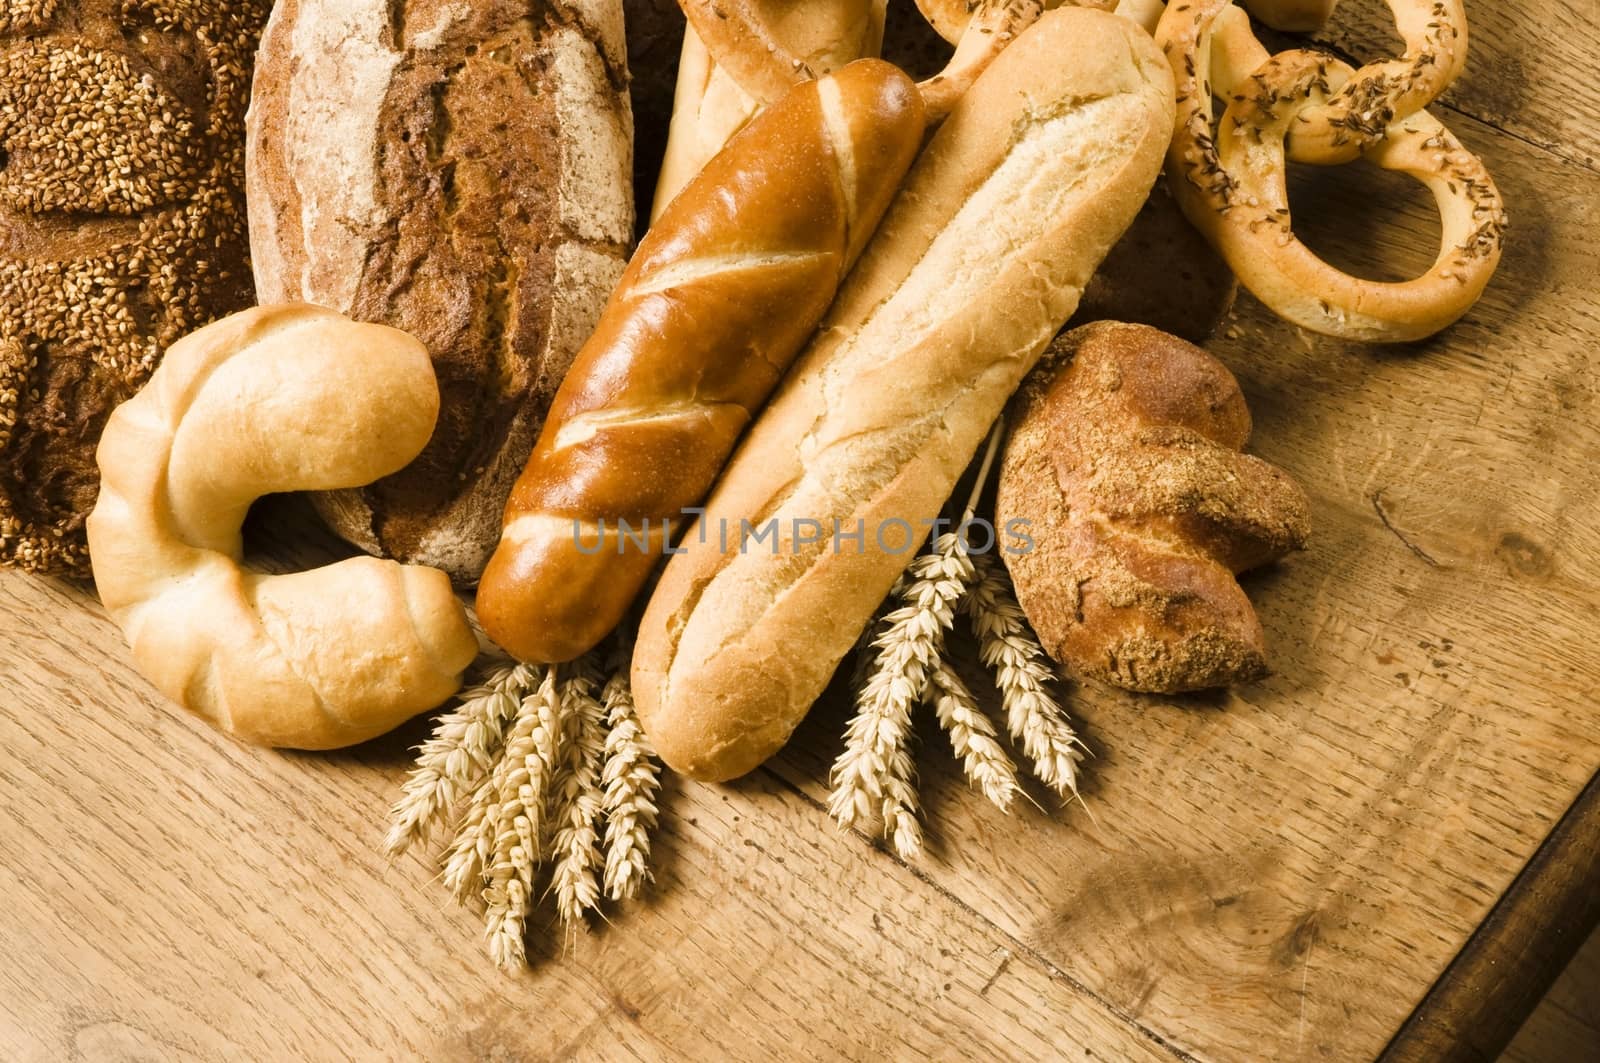 Variety of baked products - still life
